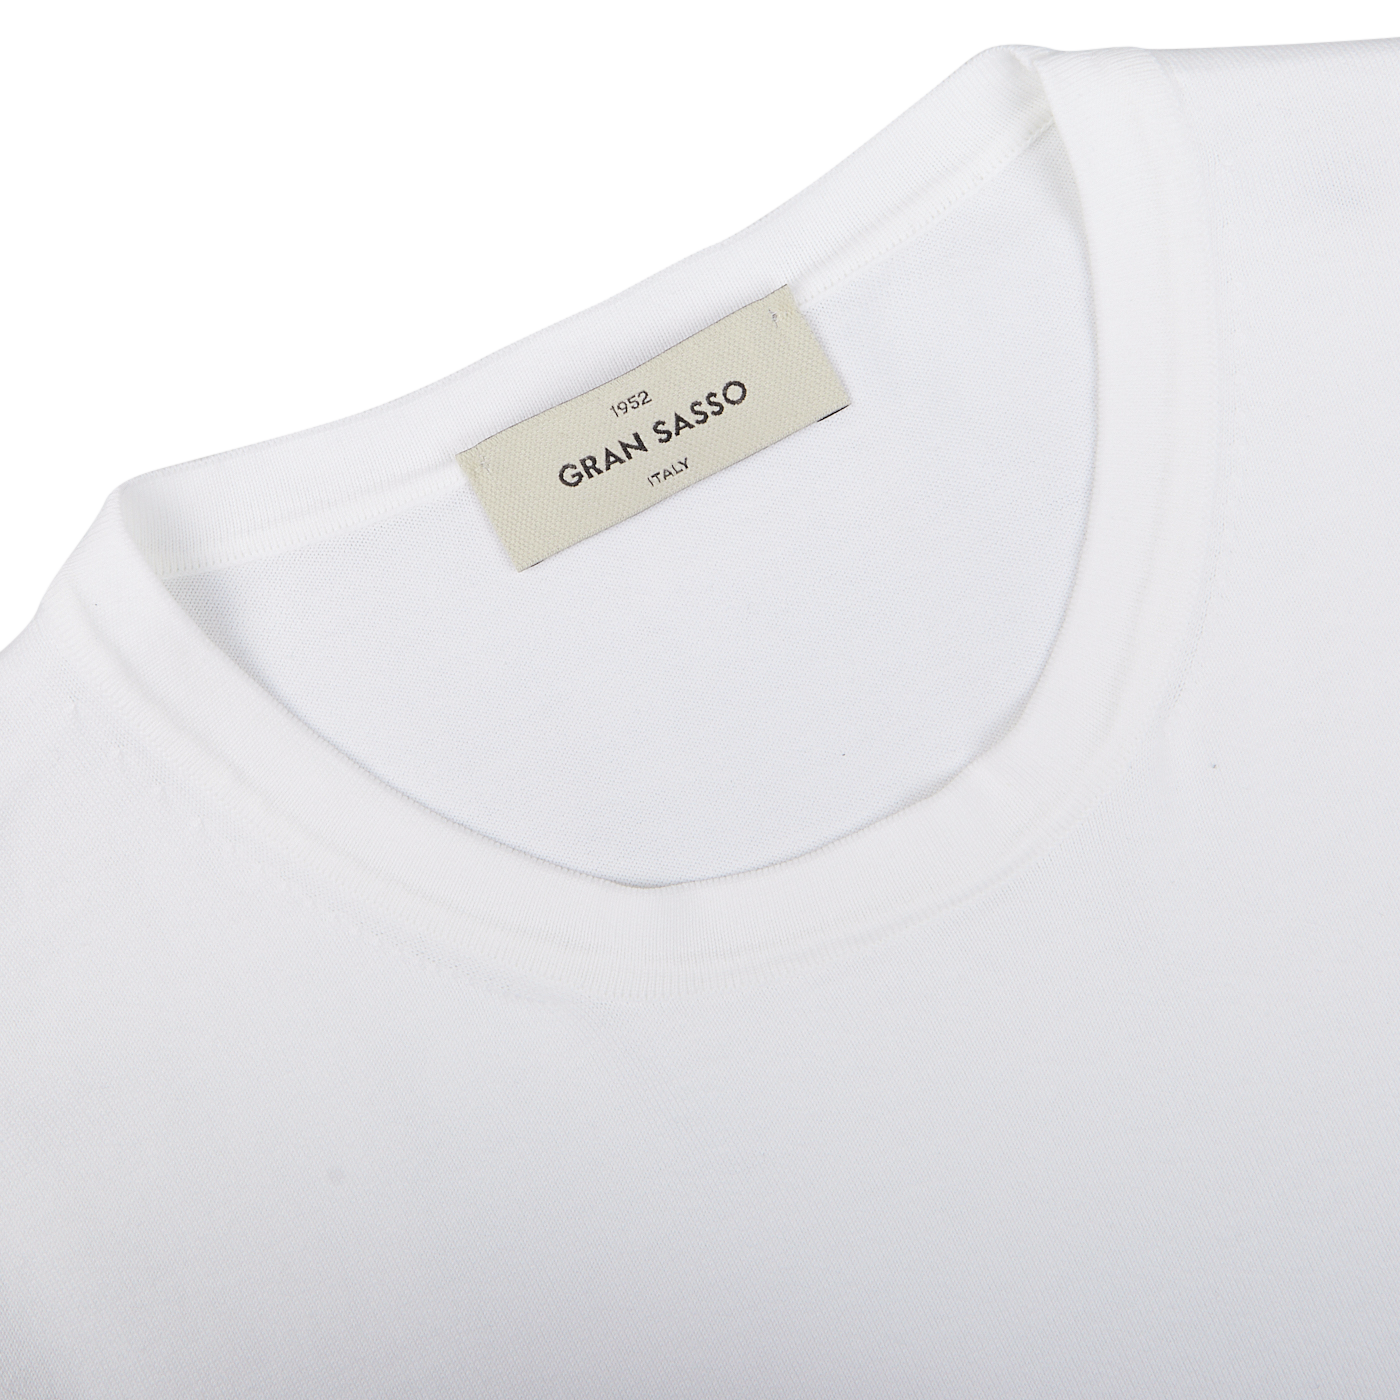 Close-up of a Gran Sasso Off-White Organic Cotton T-shirt label.